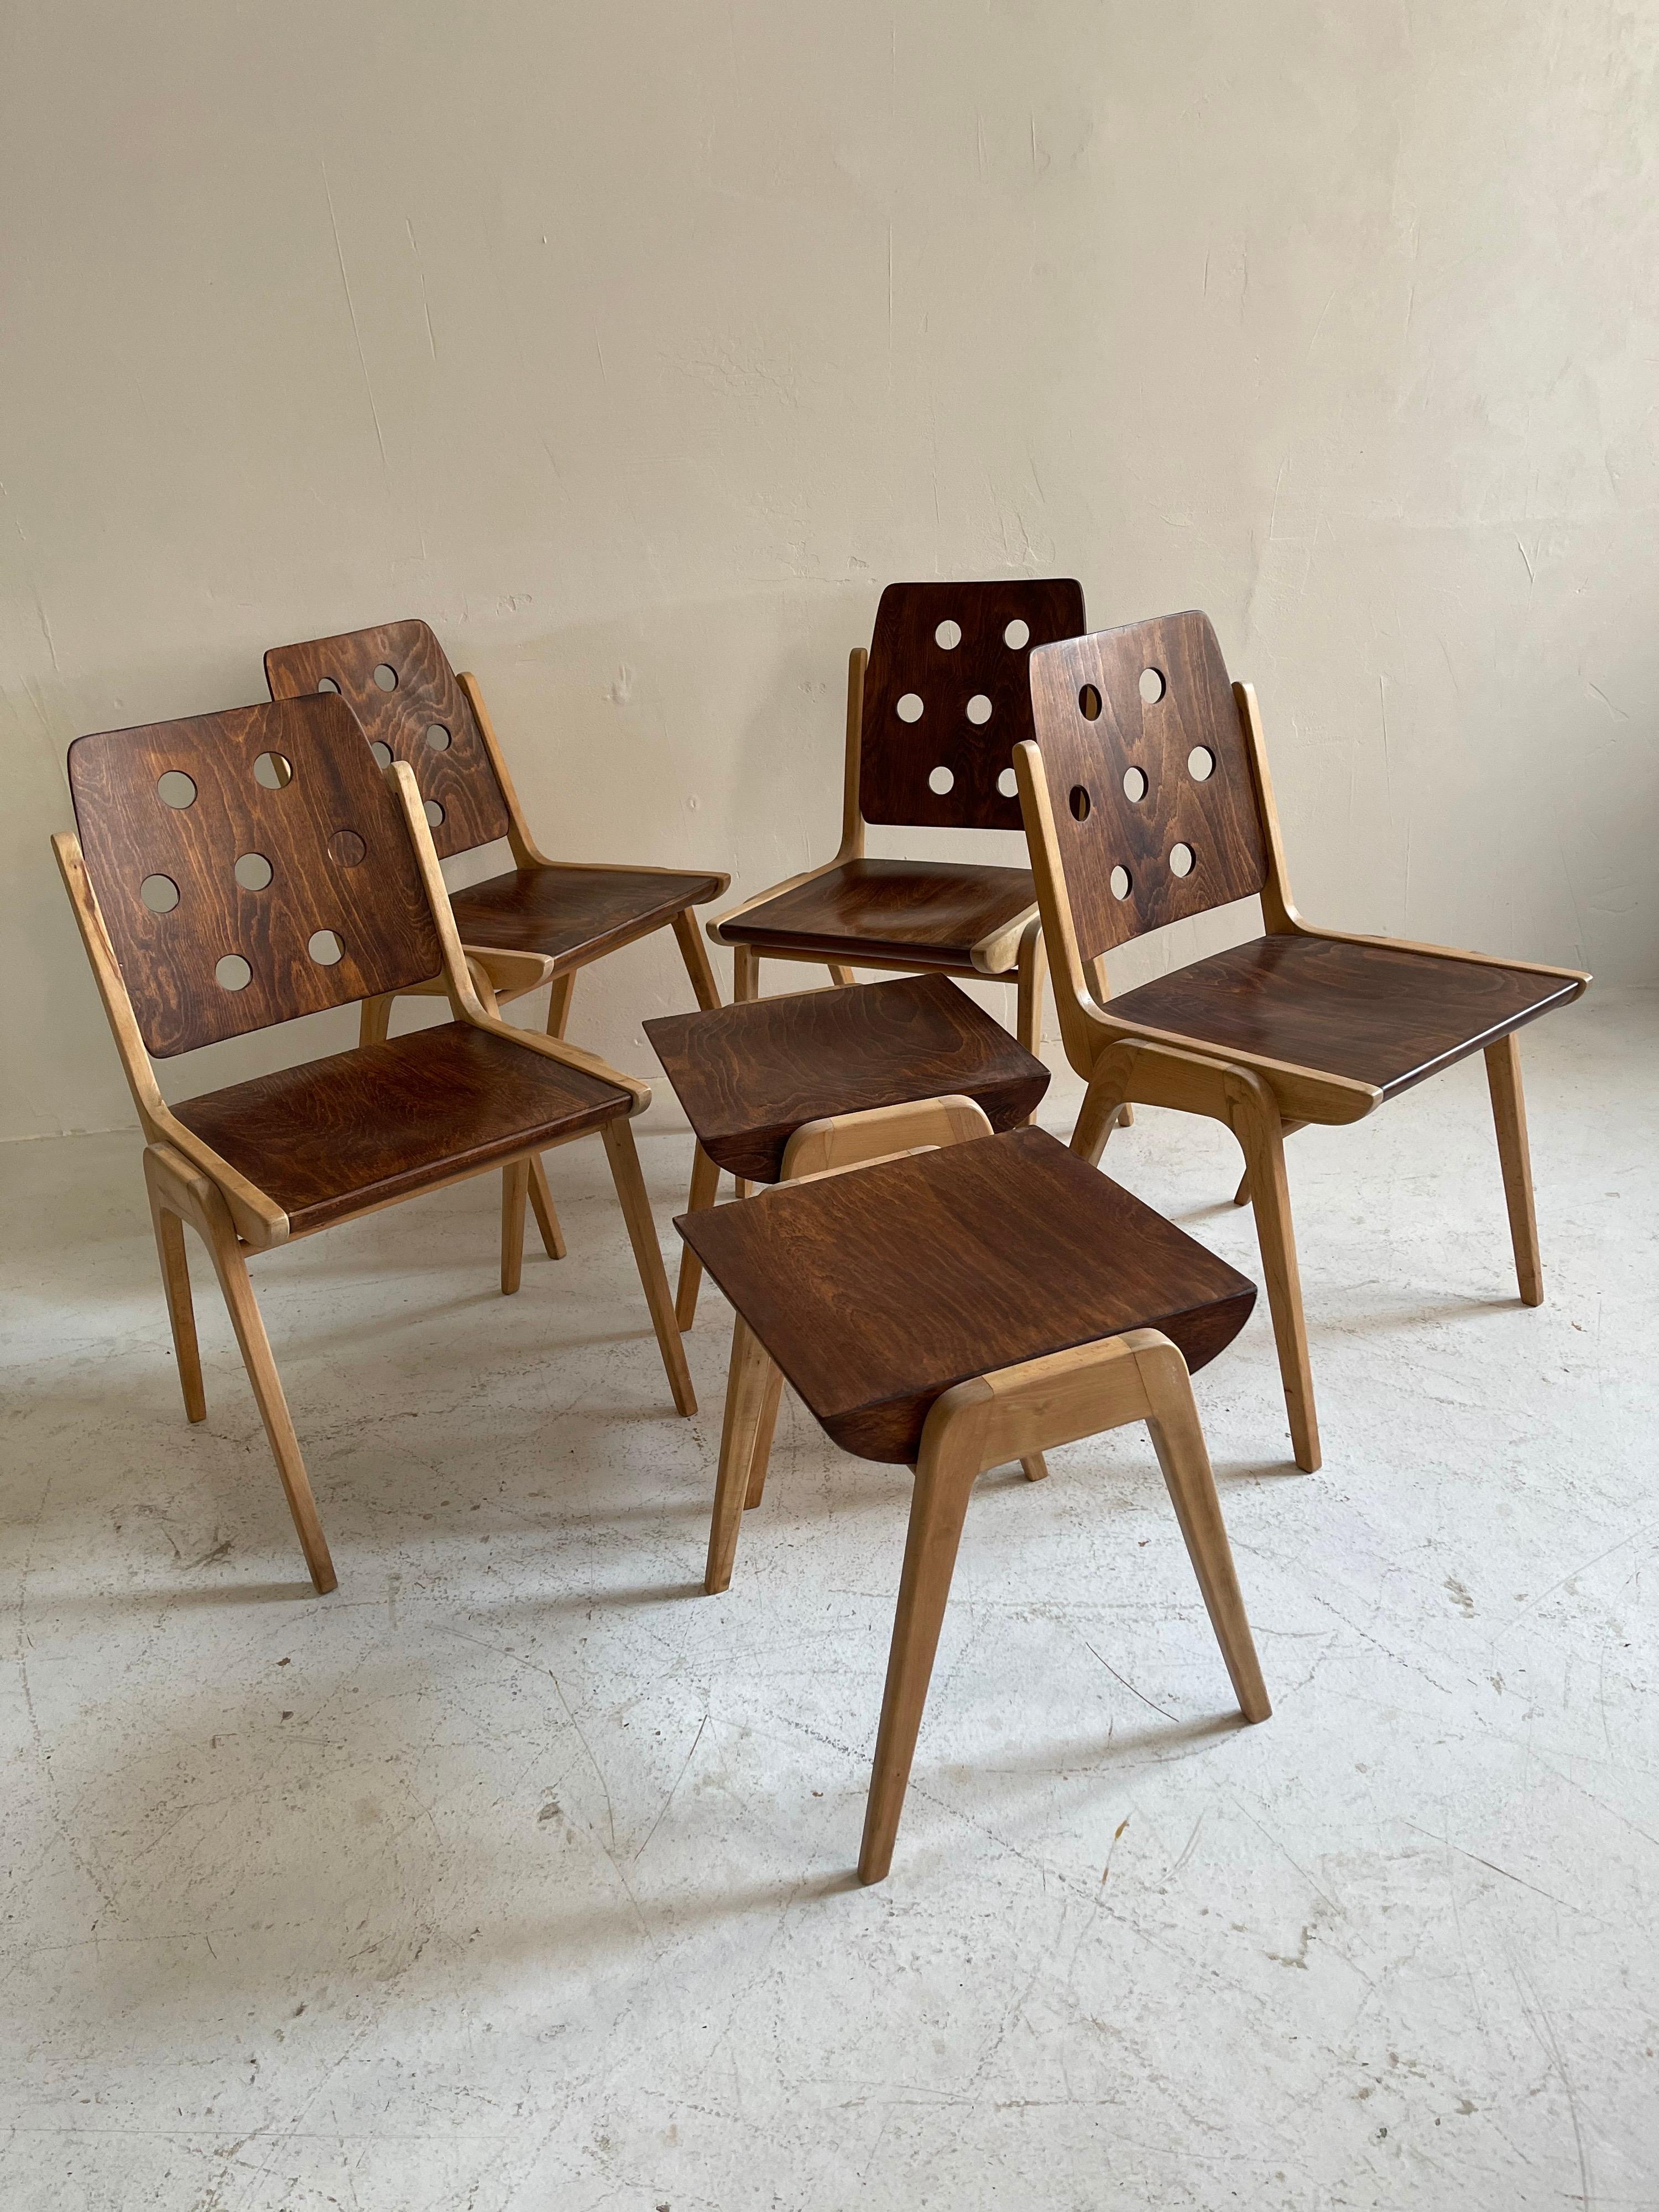 Franz Schuster Model 'Maestro' Dining Room Chairs & Stools, Austria, 1950s For Sale 10